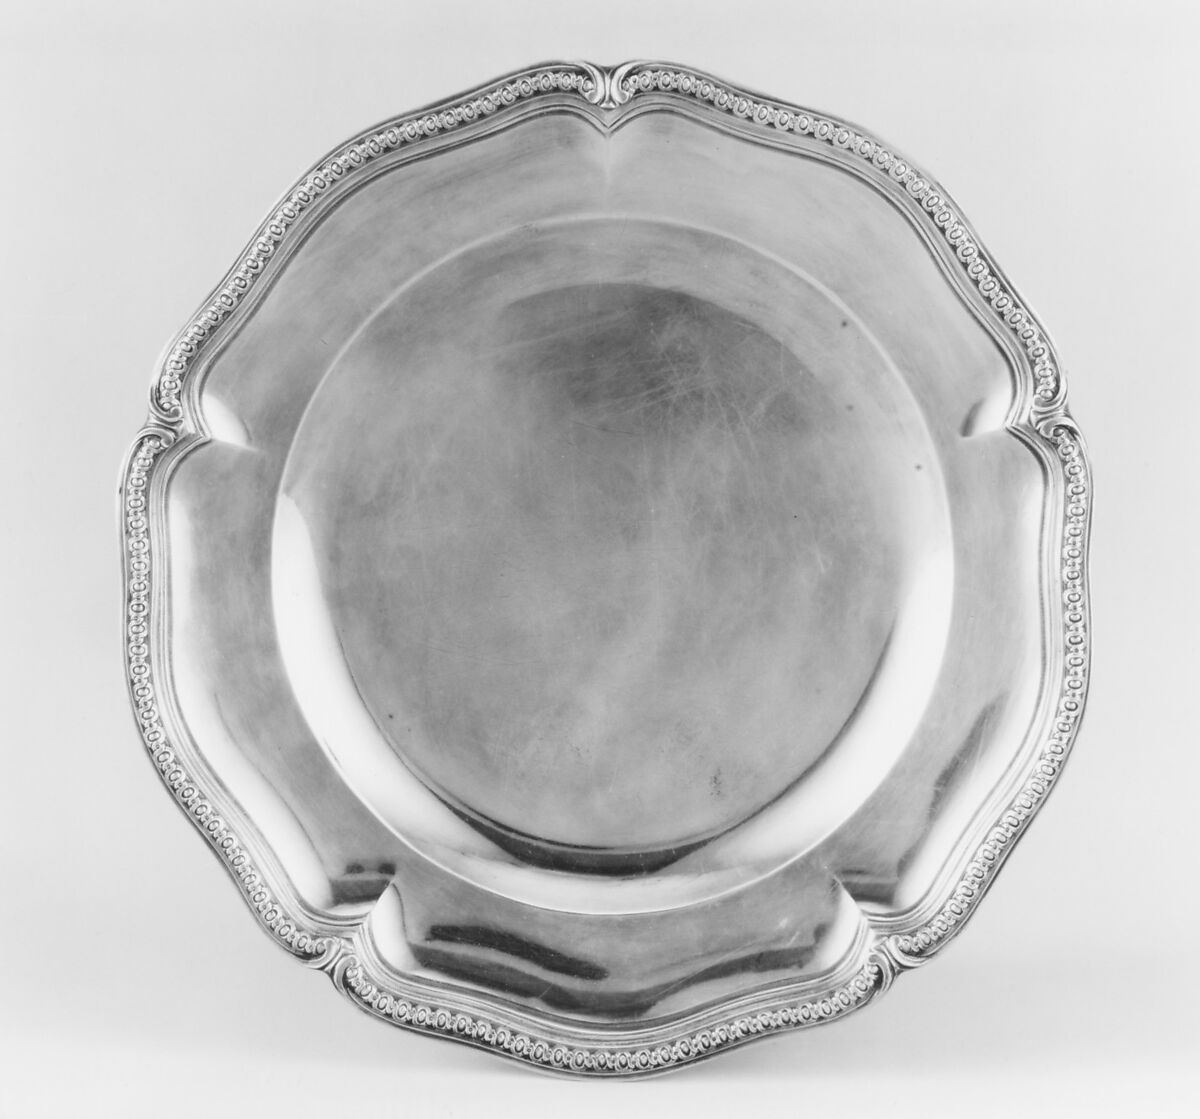 Plate, Marc-Antoine-Noel Leroy (born 1738, master 1769, recorded 1793), Silver, French, Paris 